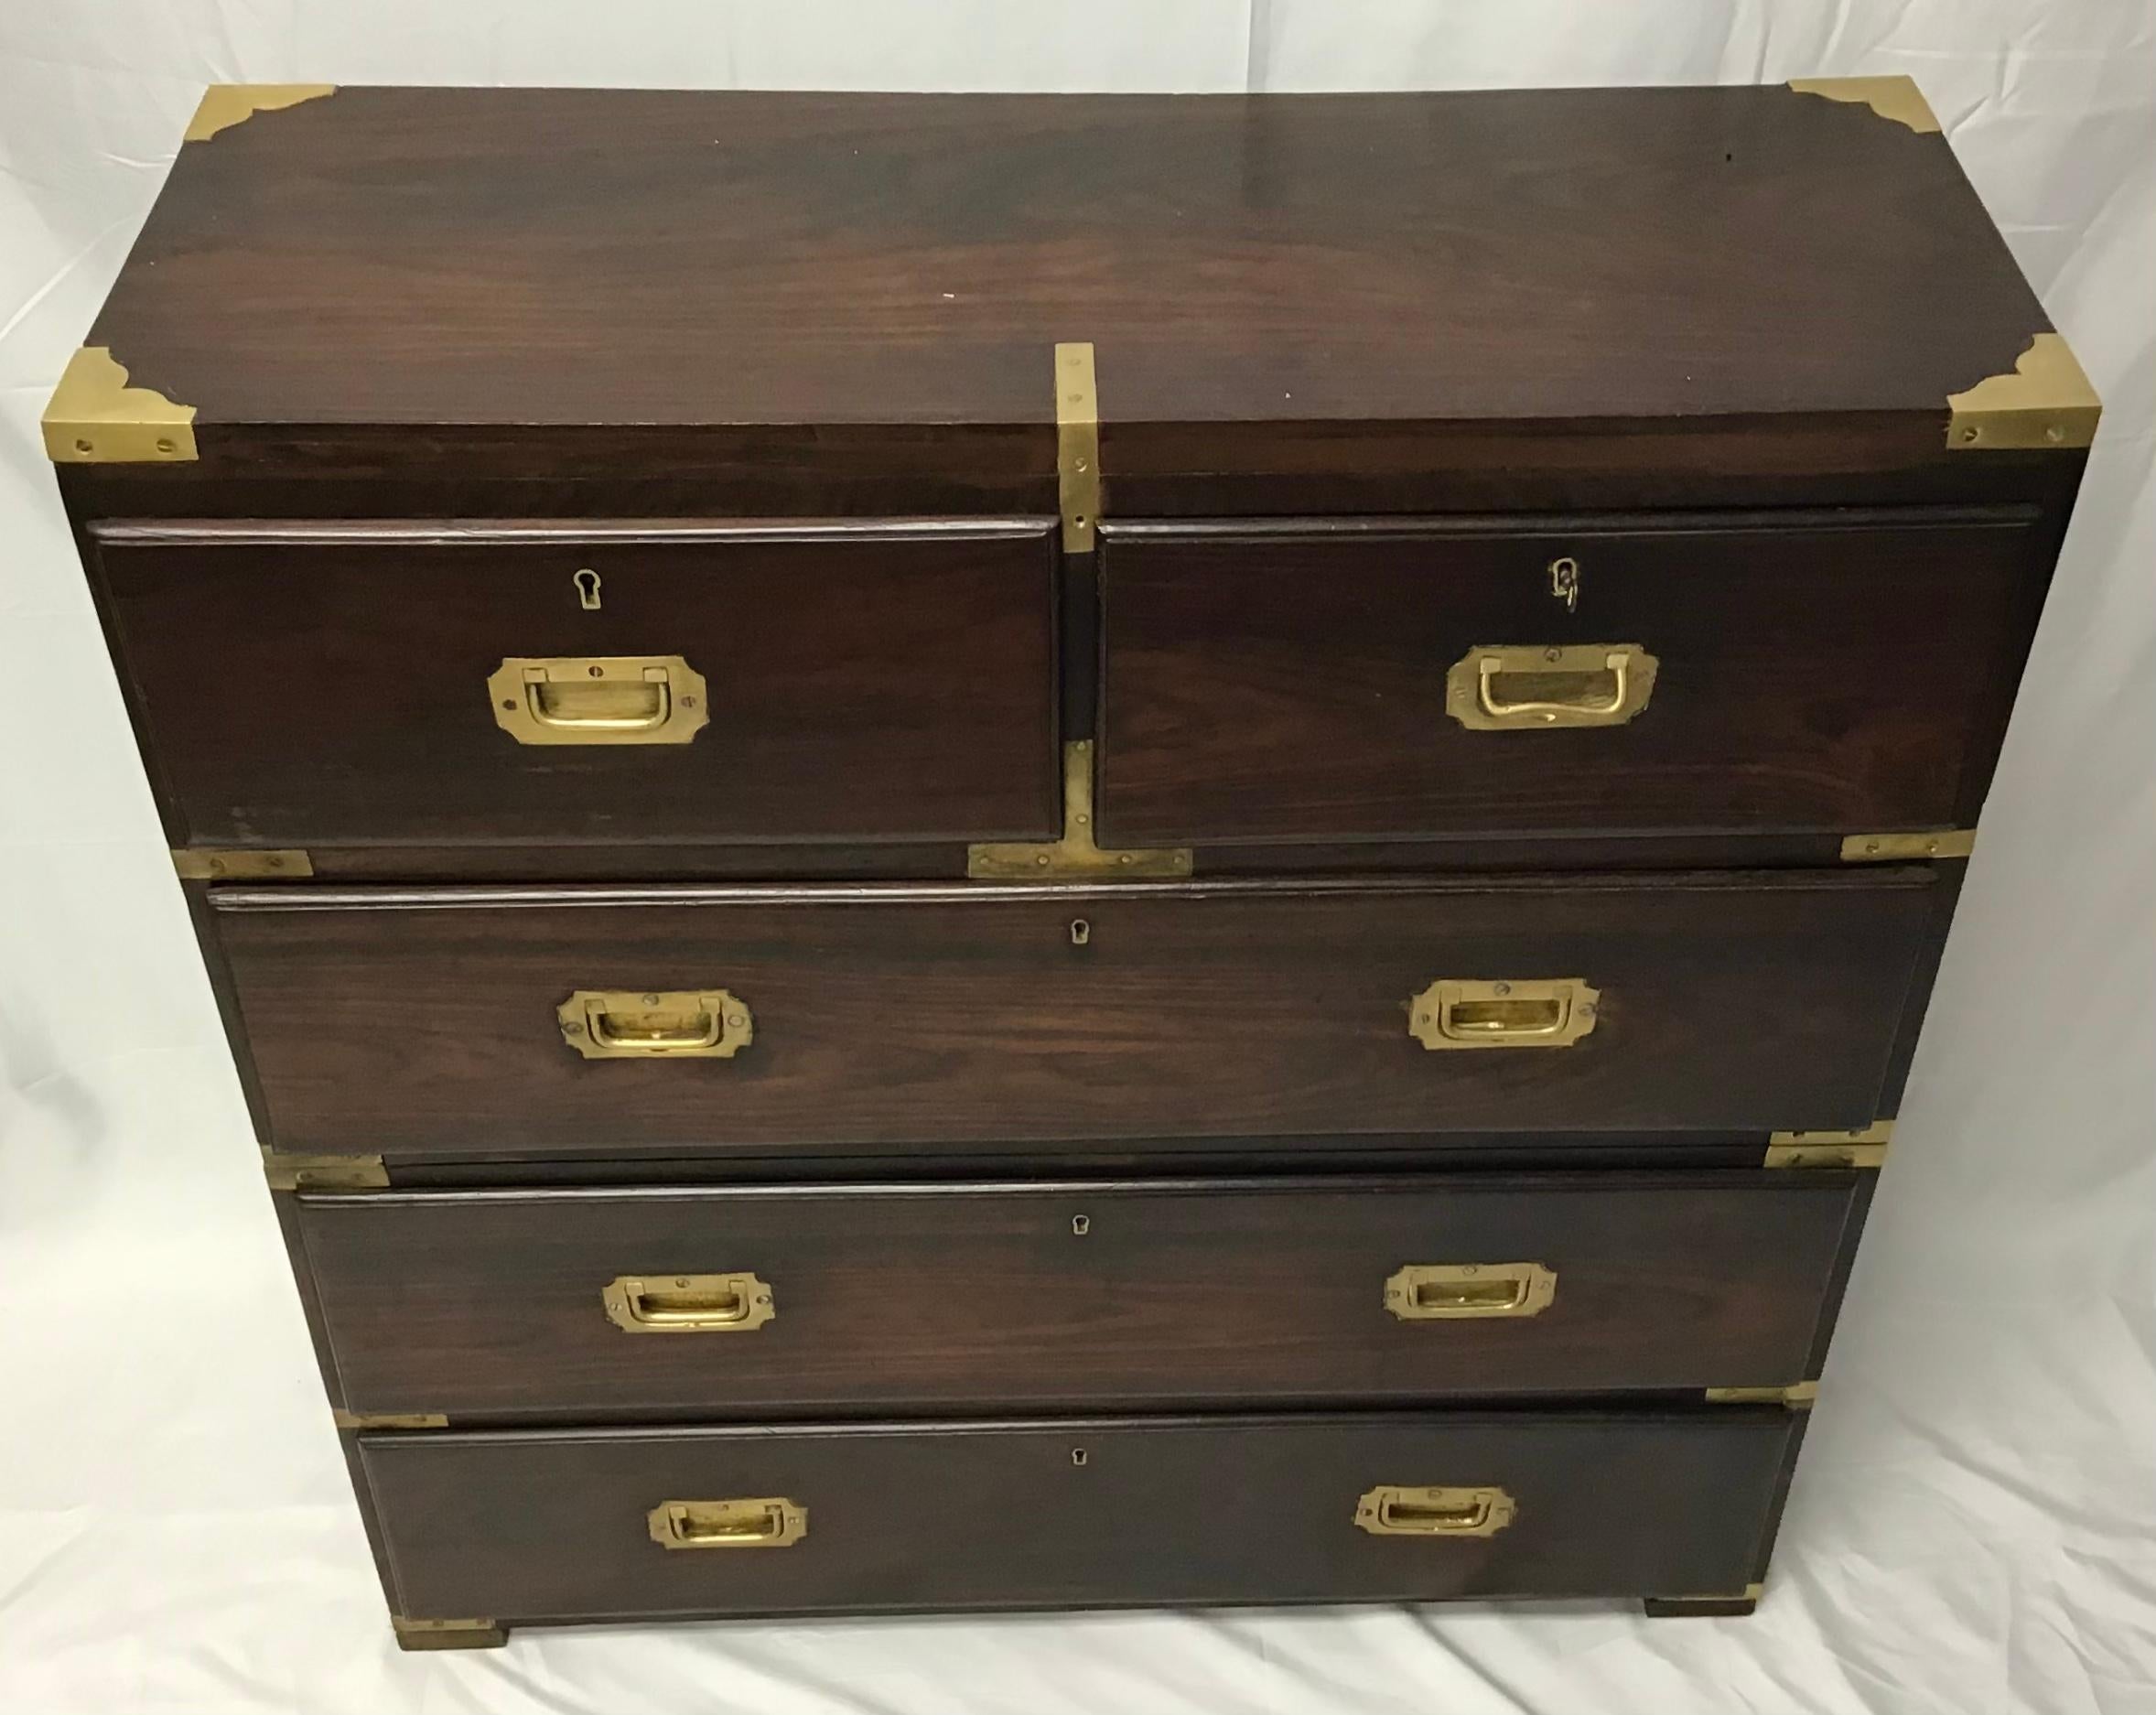 A two-part rosewood Anglo Indian campaign chest. Each section fitted with brass handles on each side and protective brass corner mounts. Each drawer front with two recessed pulls. The base supported by plinth foot. This piece is constructed with